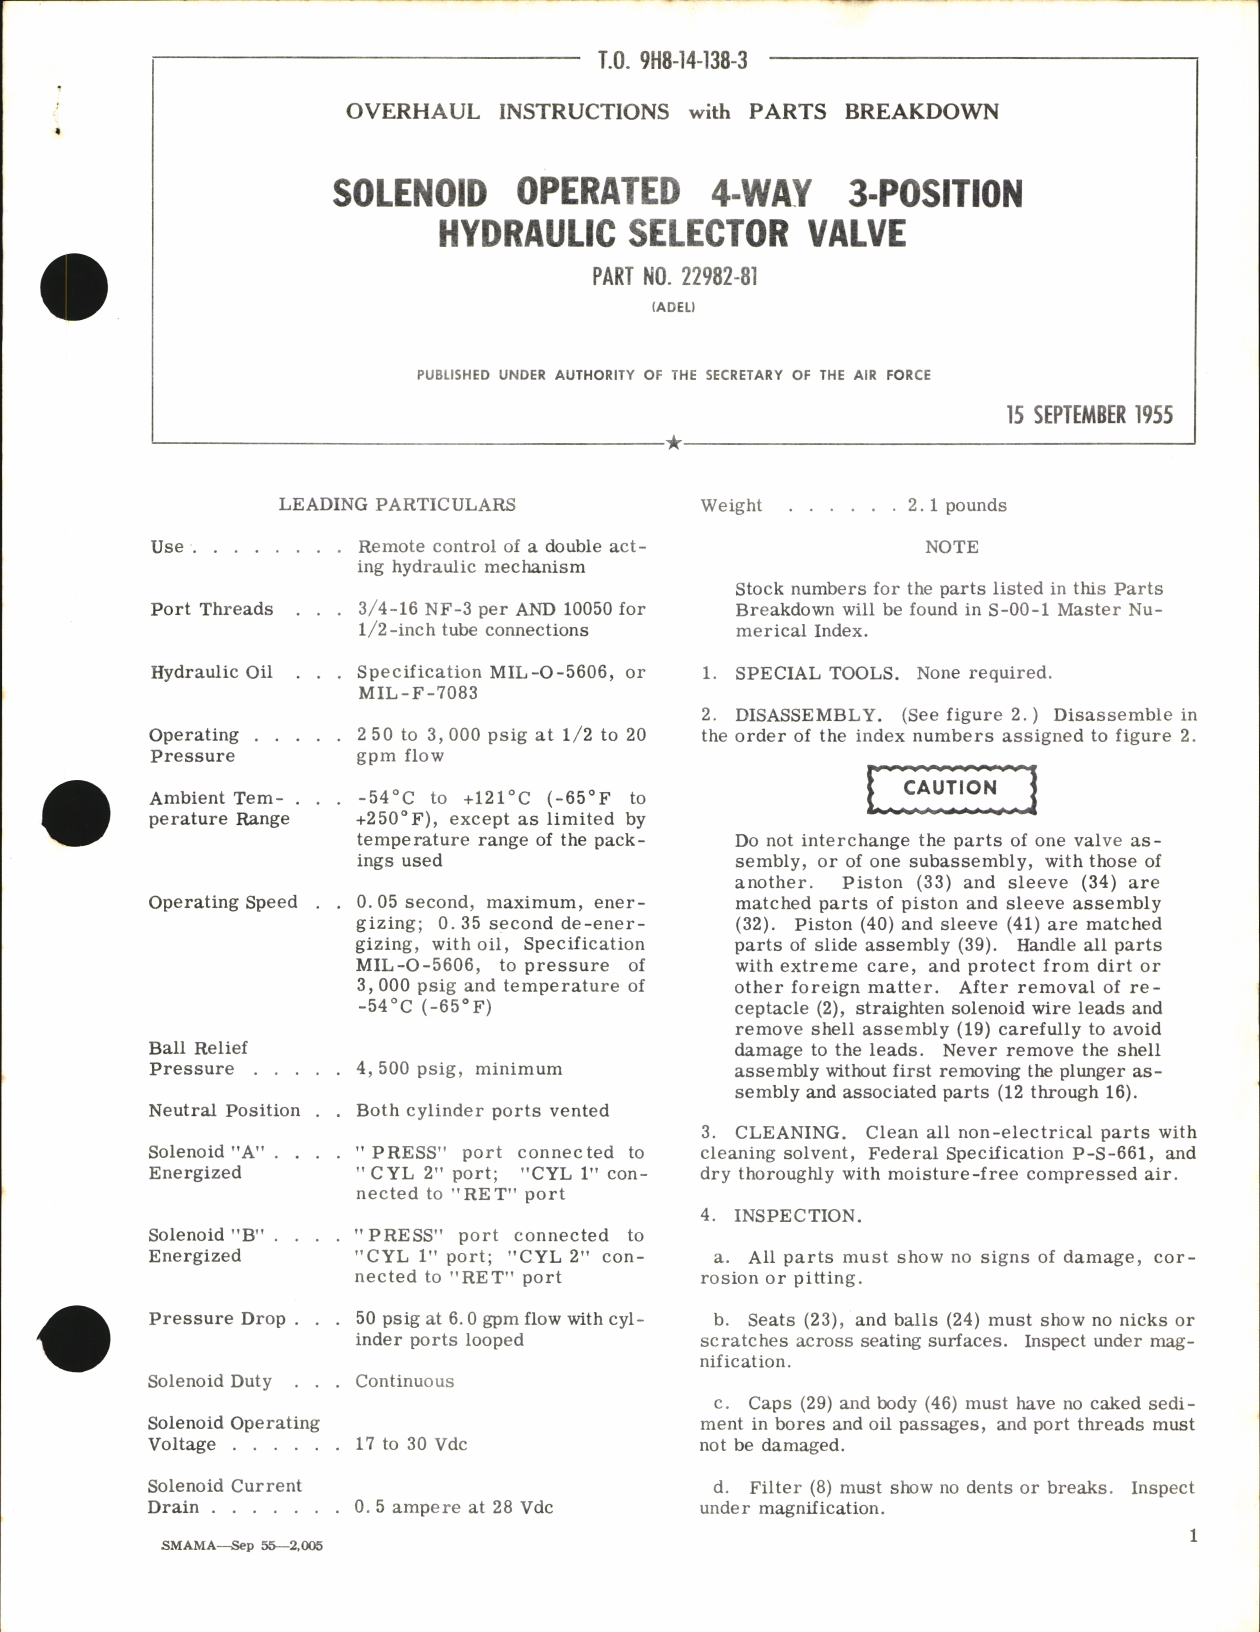 Sample page 1 from AirCorps Library document: Overhaul Instructions with Parts Breakdown for Solenoid Operated 4-Way 3-Position Hydraulic Selector Valve Part No. 22982-81